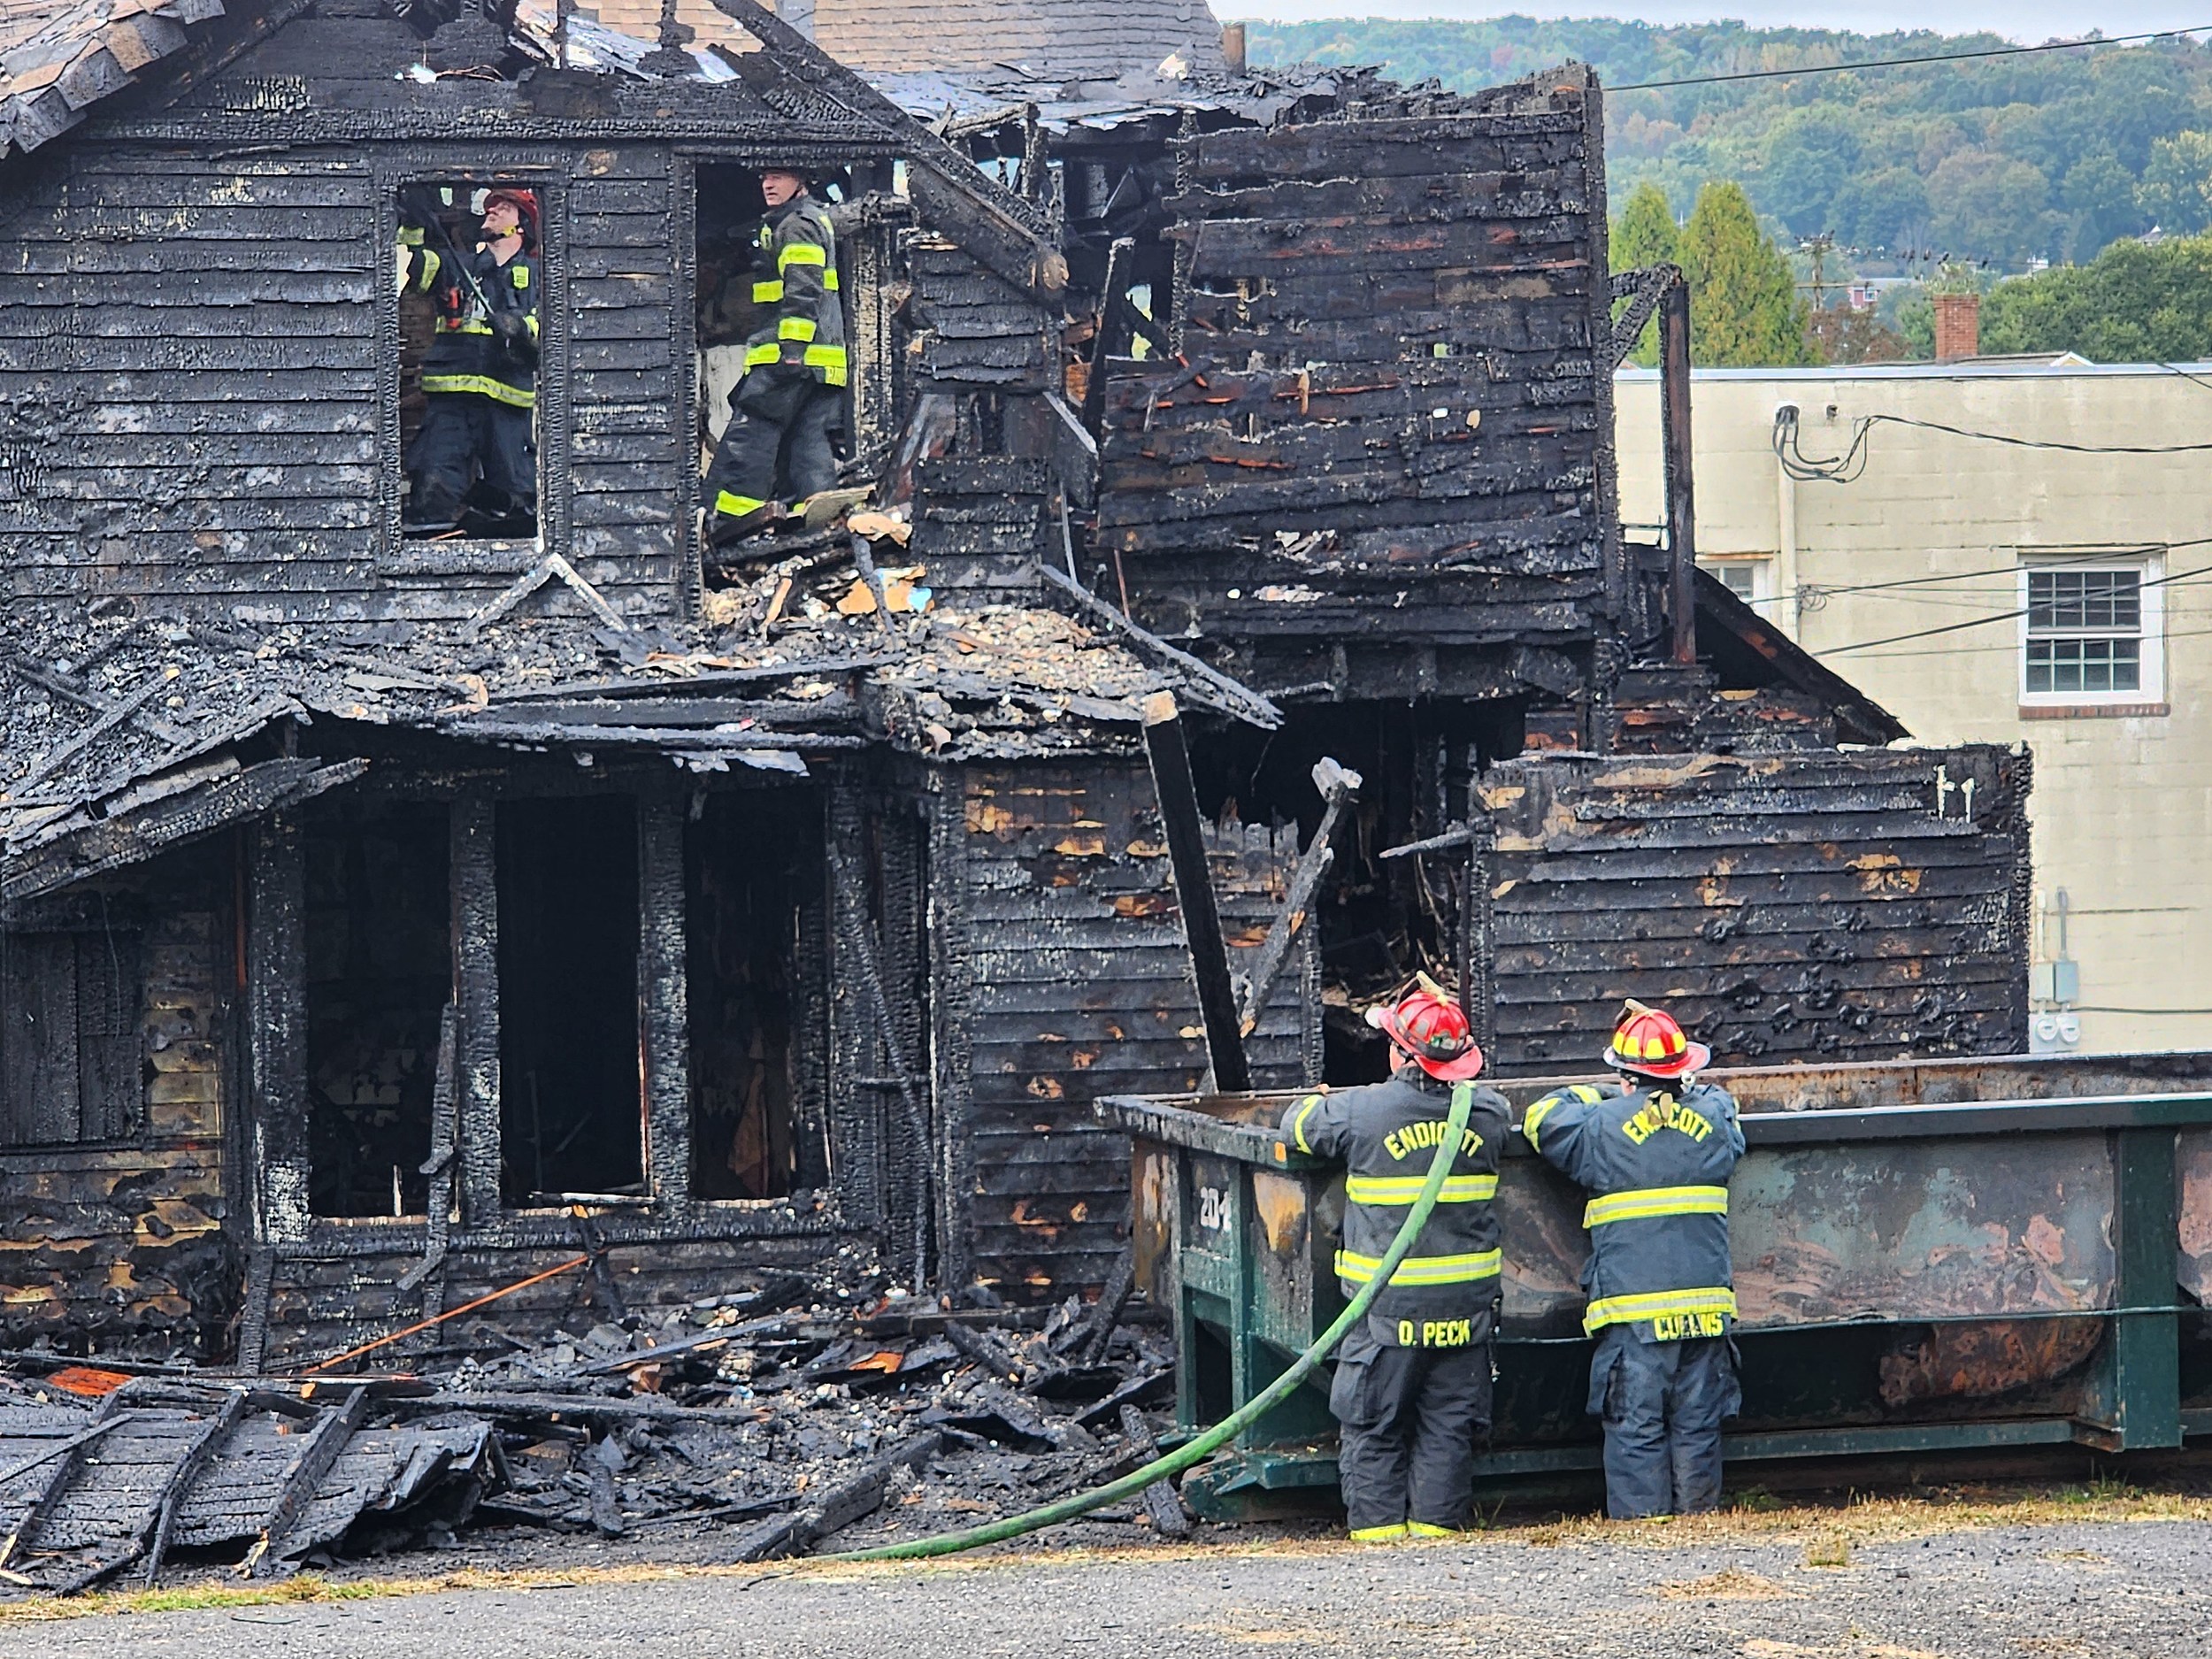 House in Endicotts Union District Heavily Damaged by Fire photo image pic